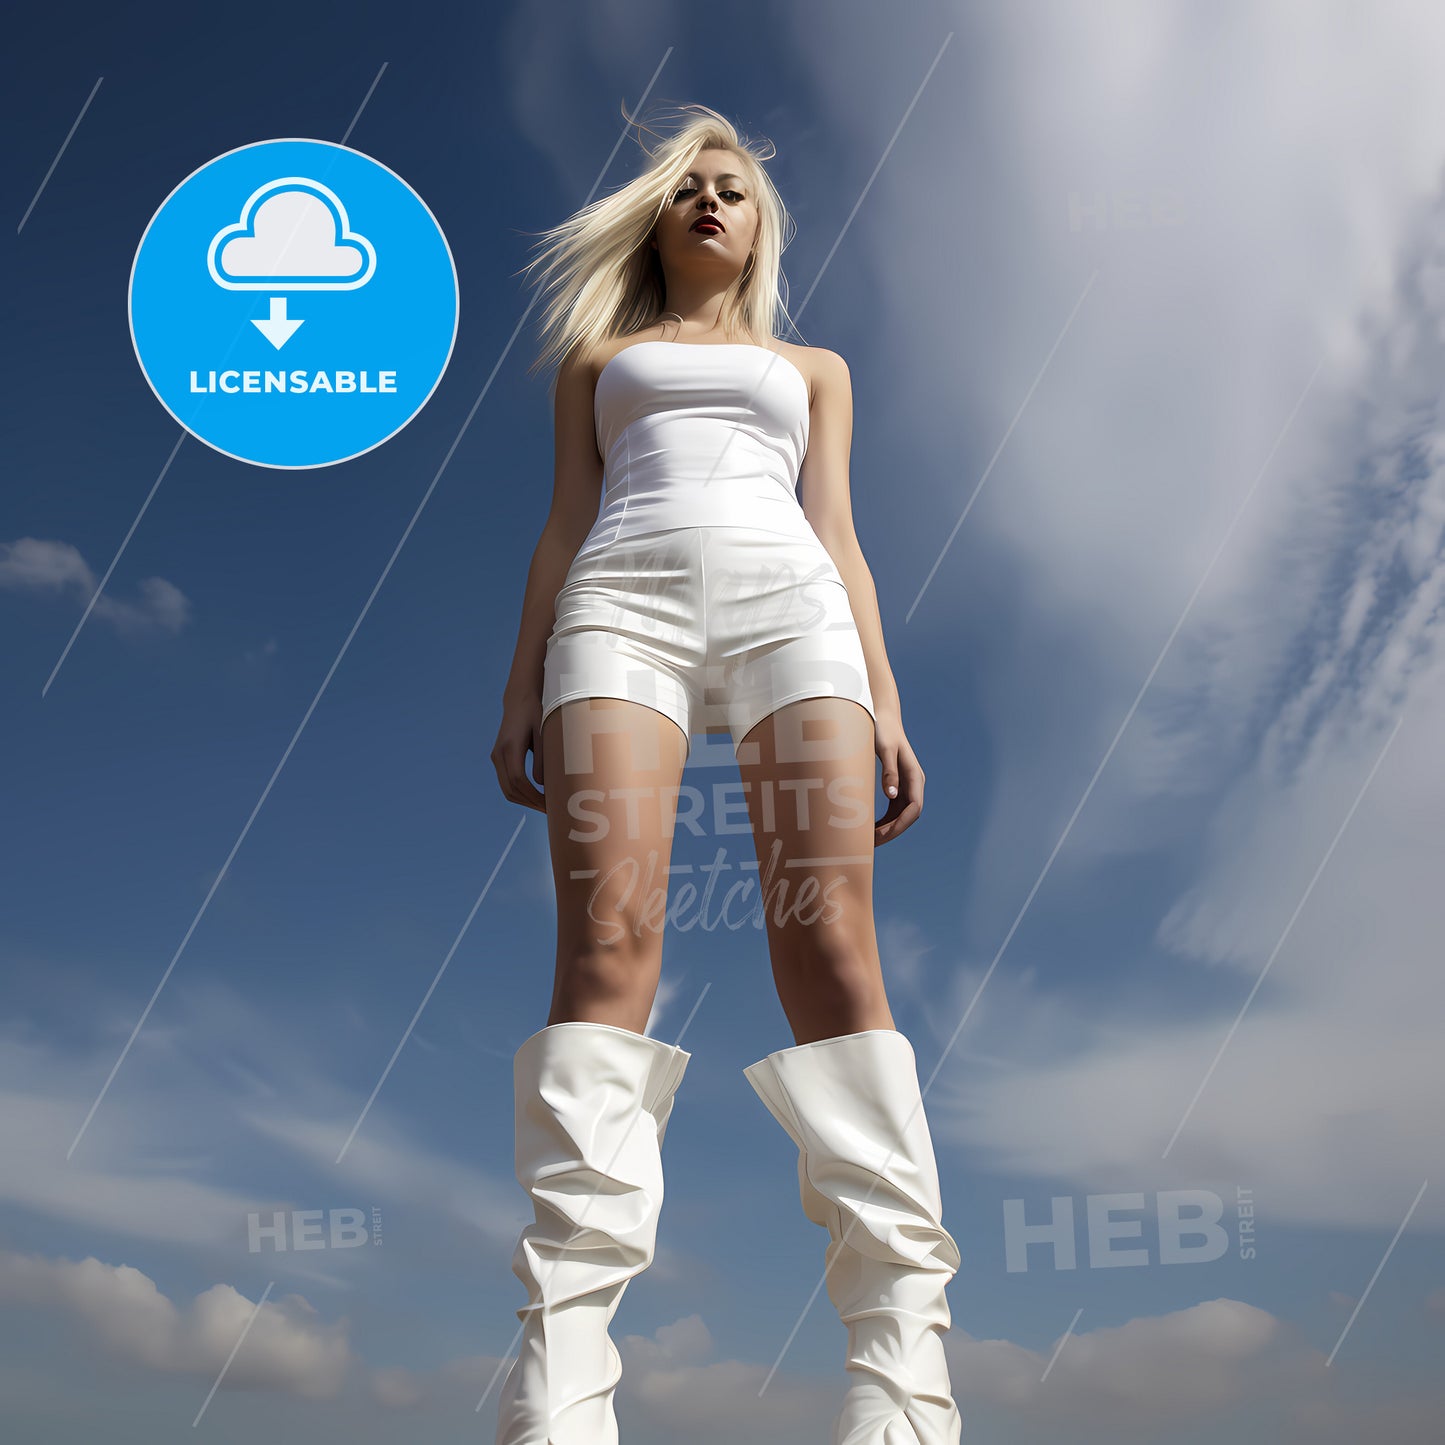 Young 25 Years Old Angry Blond Girl, A Woman In White Outfit And Boots